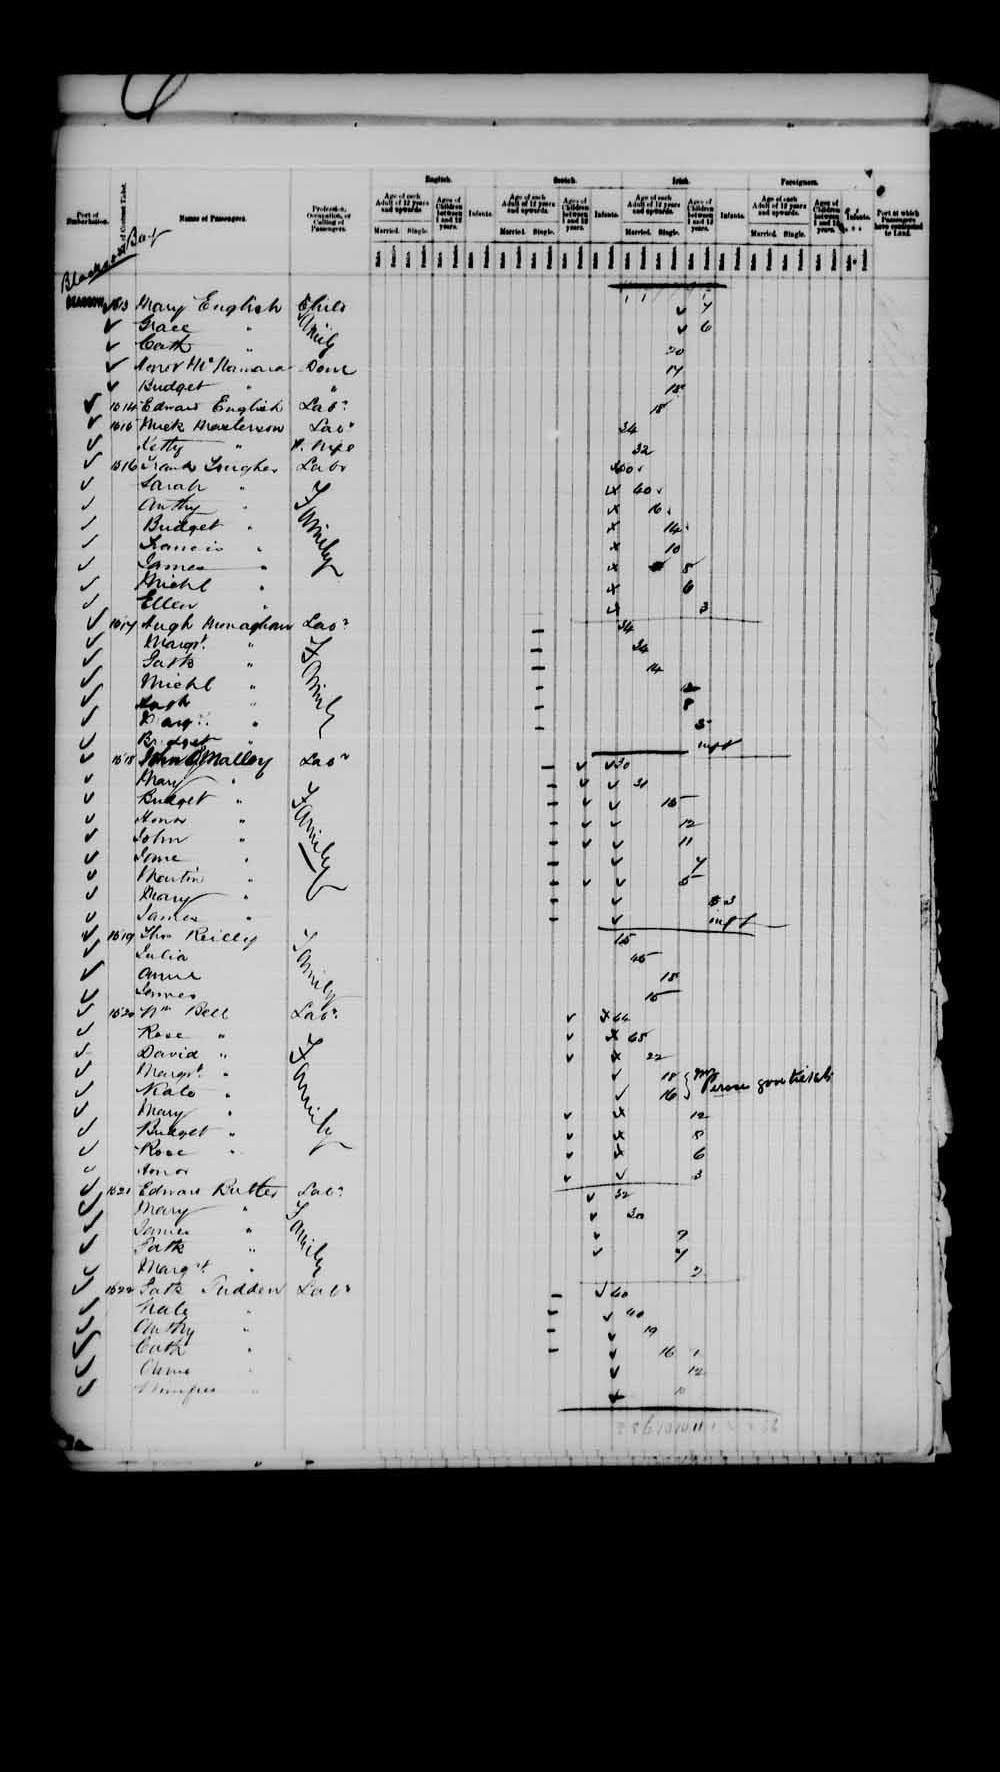 Digitized page of Passenger Lists for Image No.: e003542679